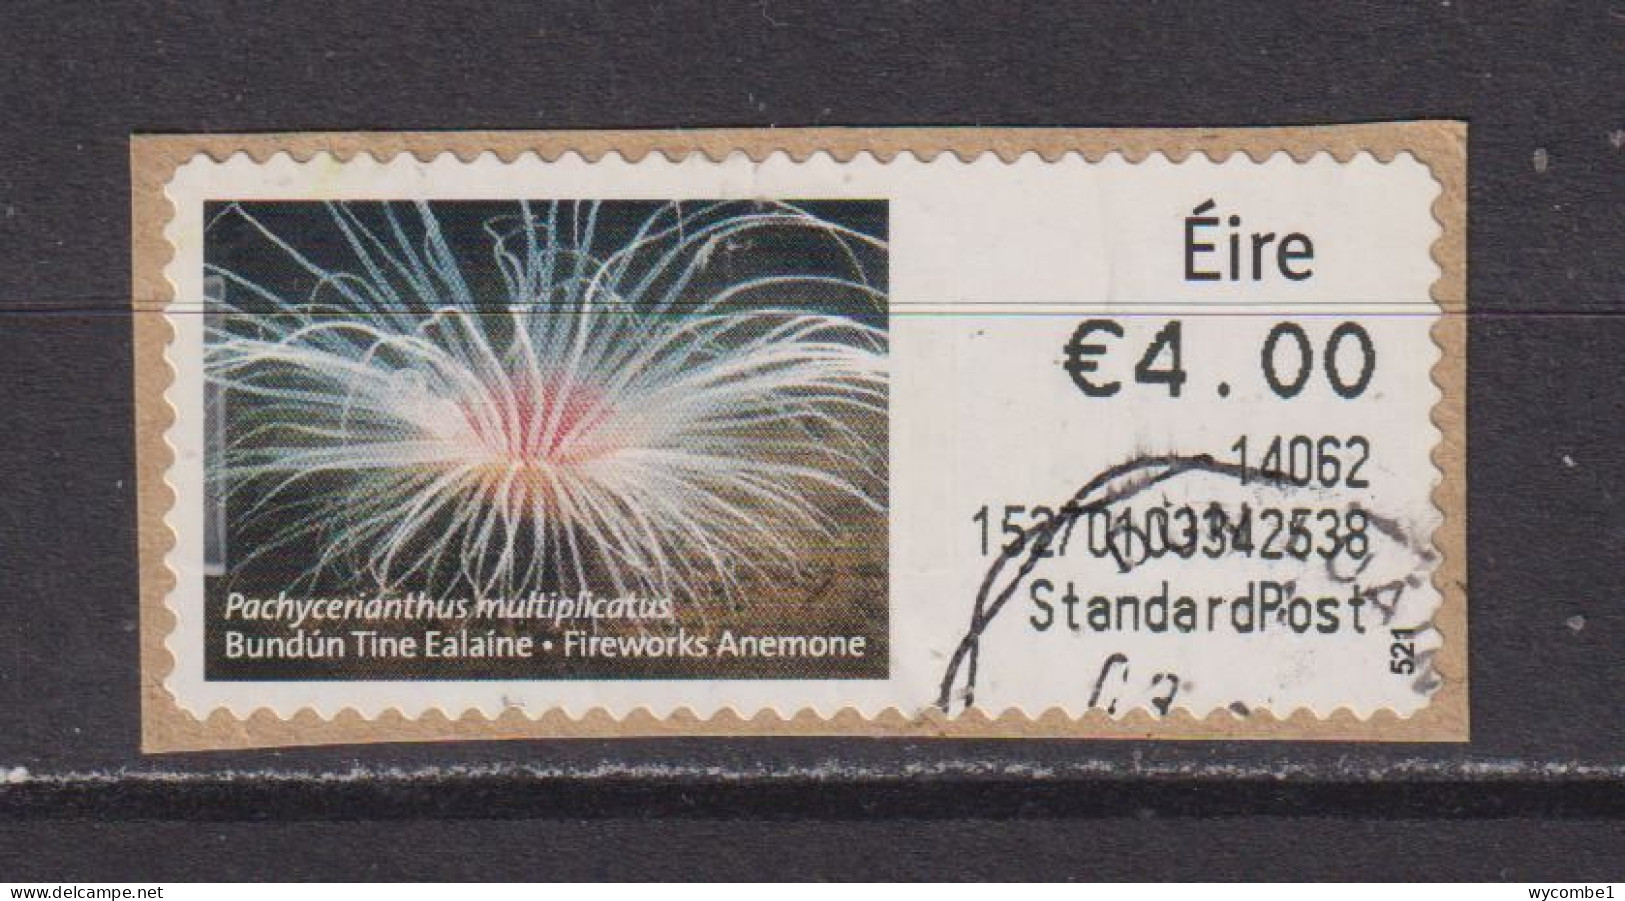 IRELAND  -  2012 Fireworks Anemone SOAR (Stamp On A Roll)  CDS  Used On Piece As Scan - Oblitérés